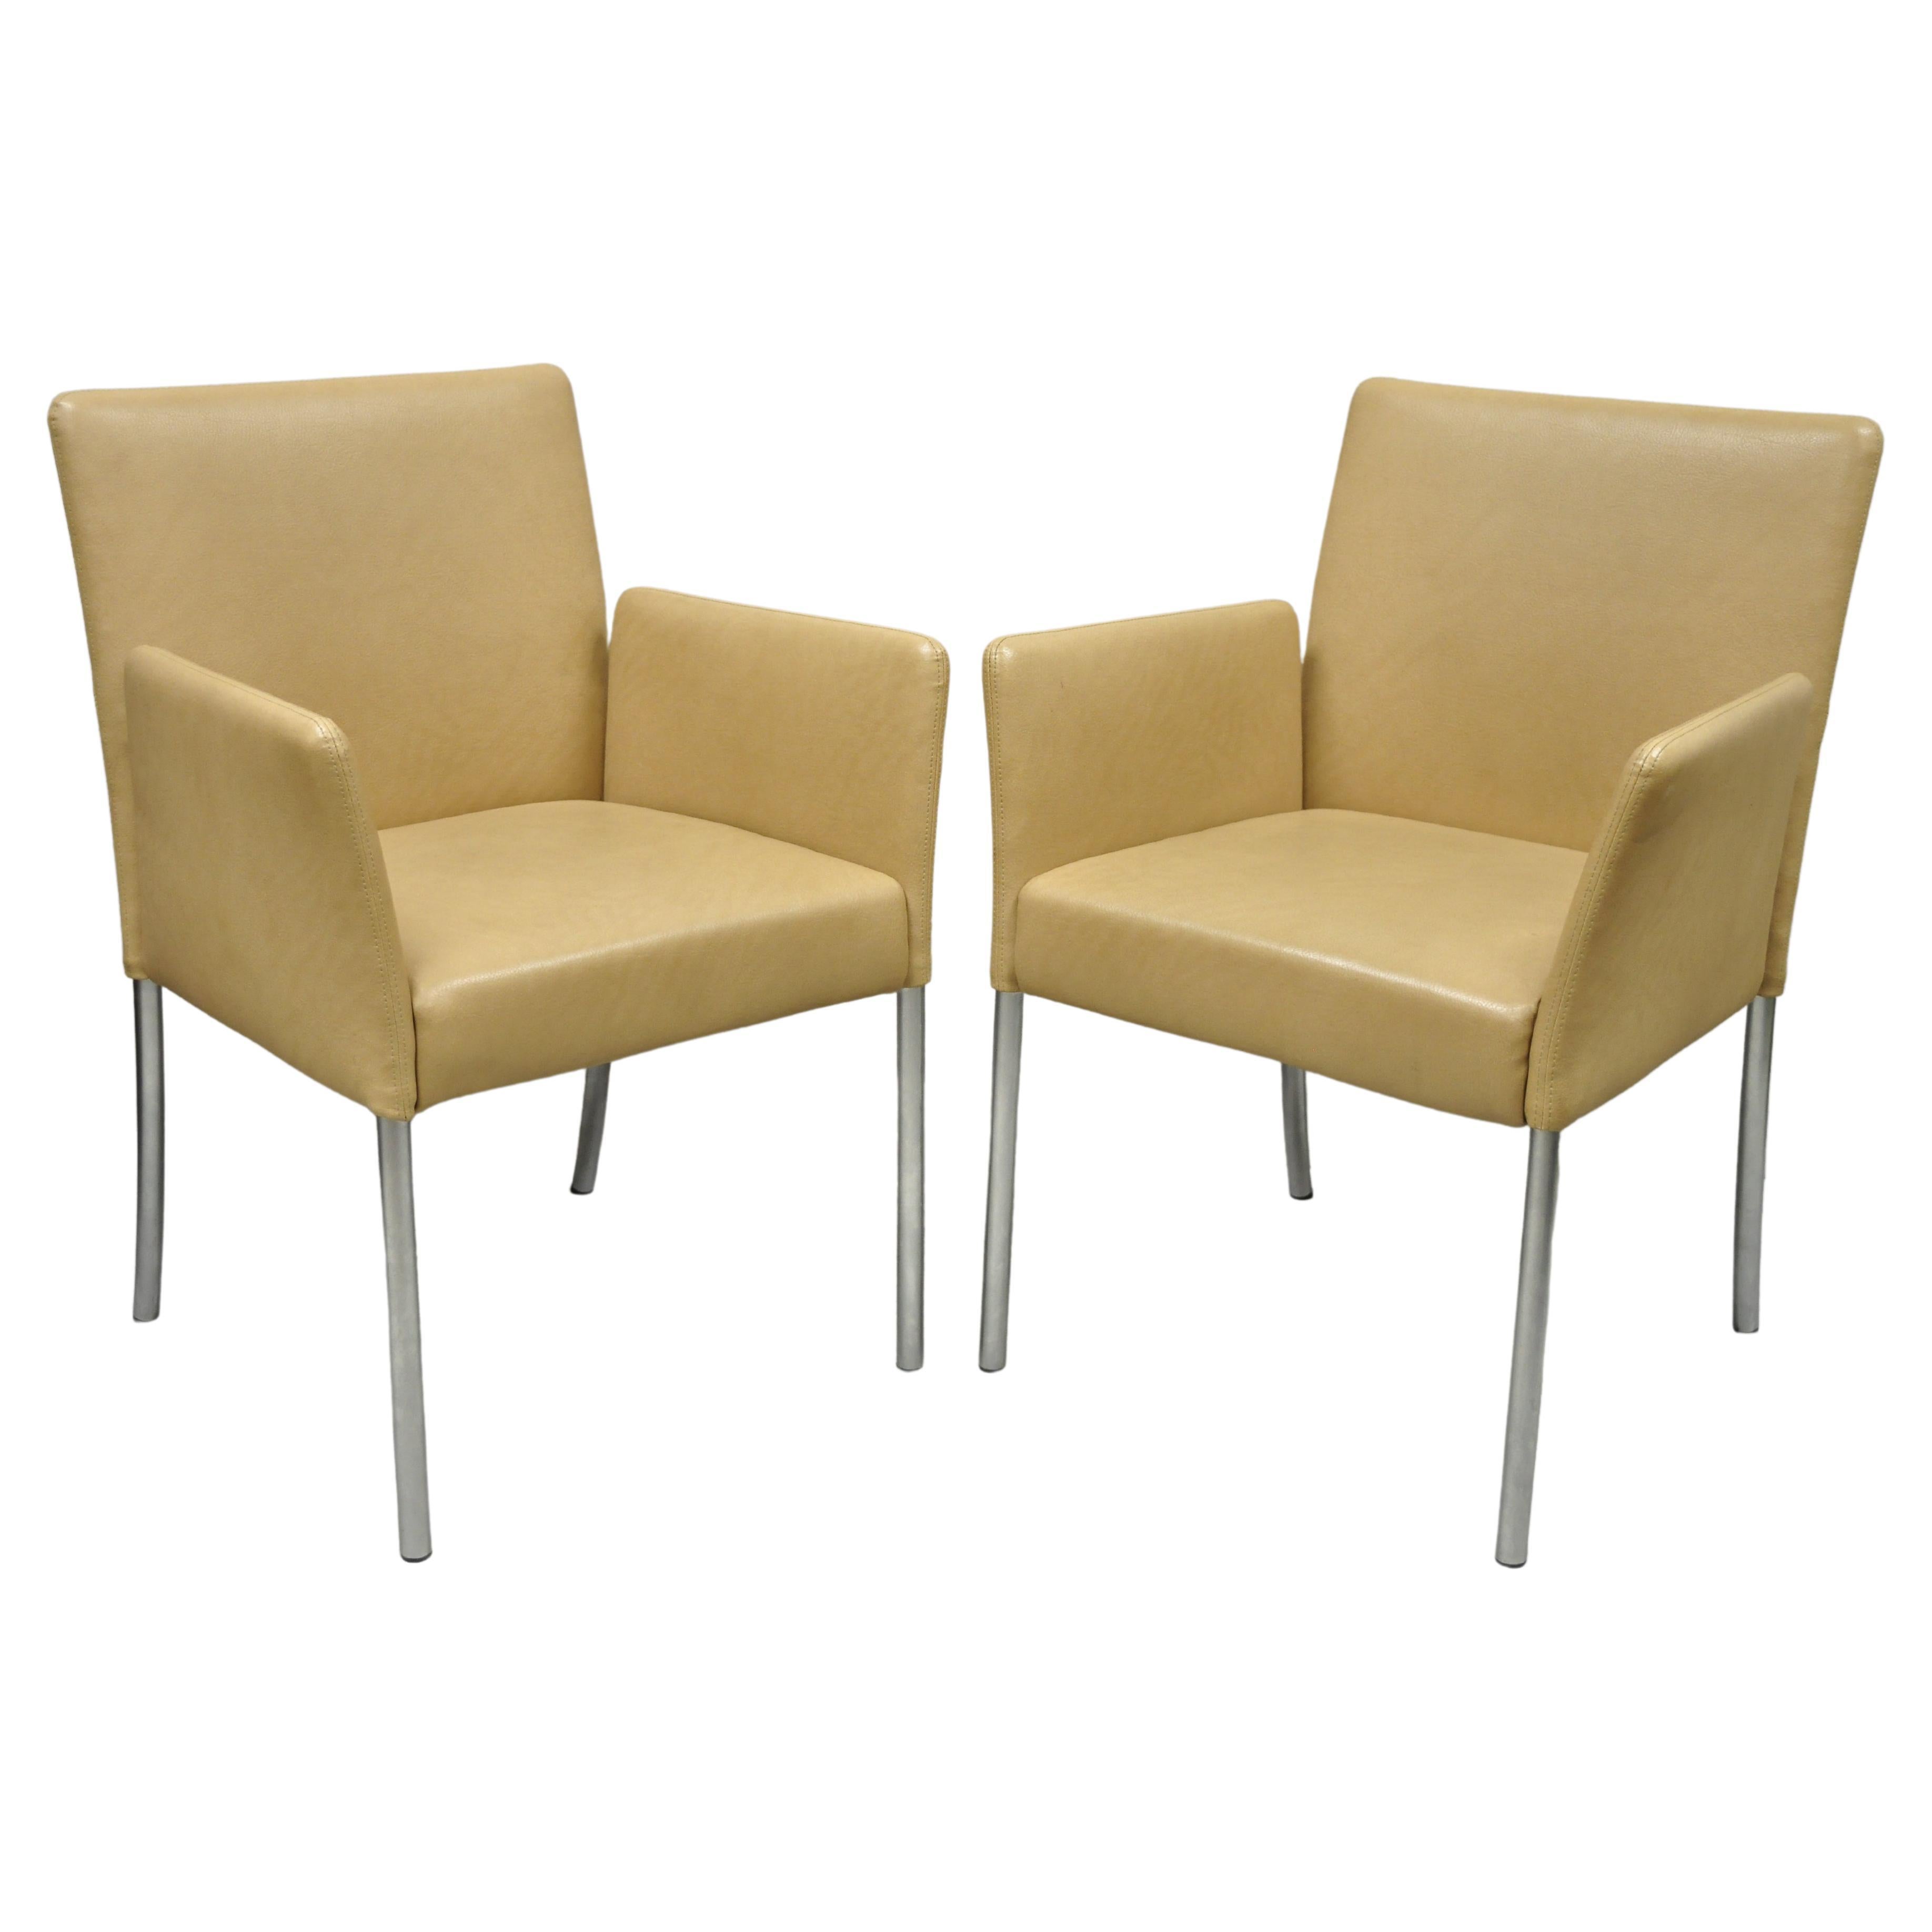 Coalesce Steelcase Beige Leather Model 1510 Switch Guest Armchair (B), a Pair